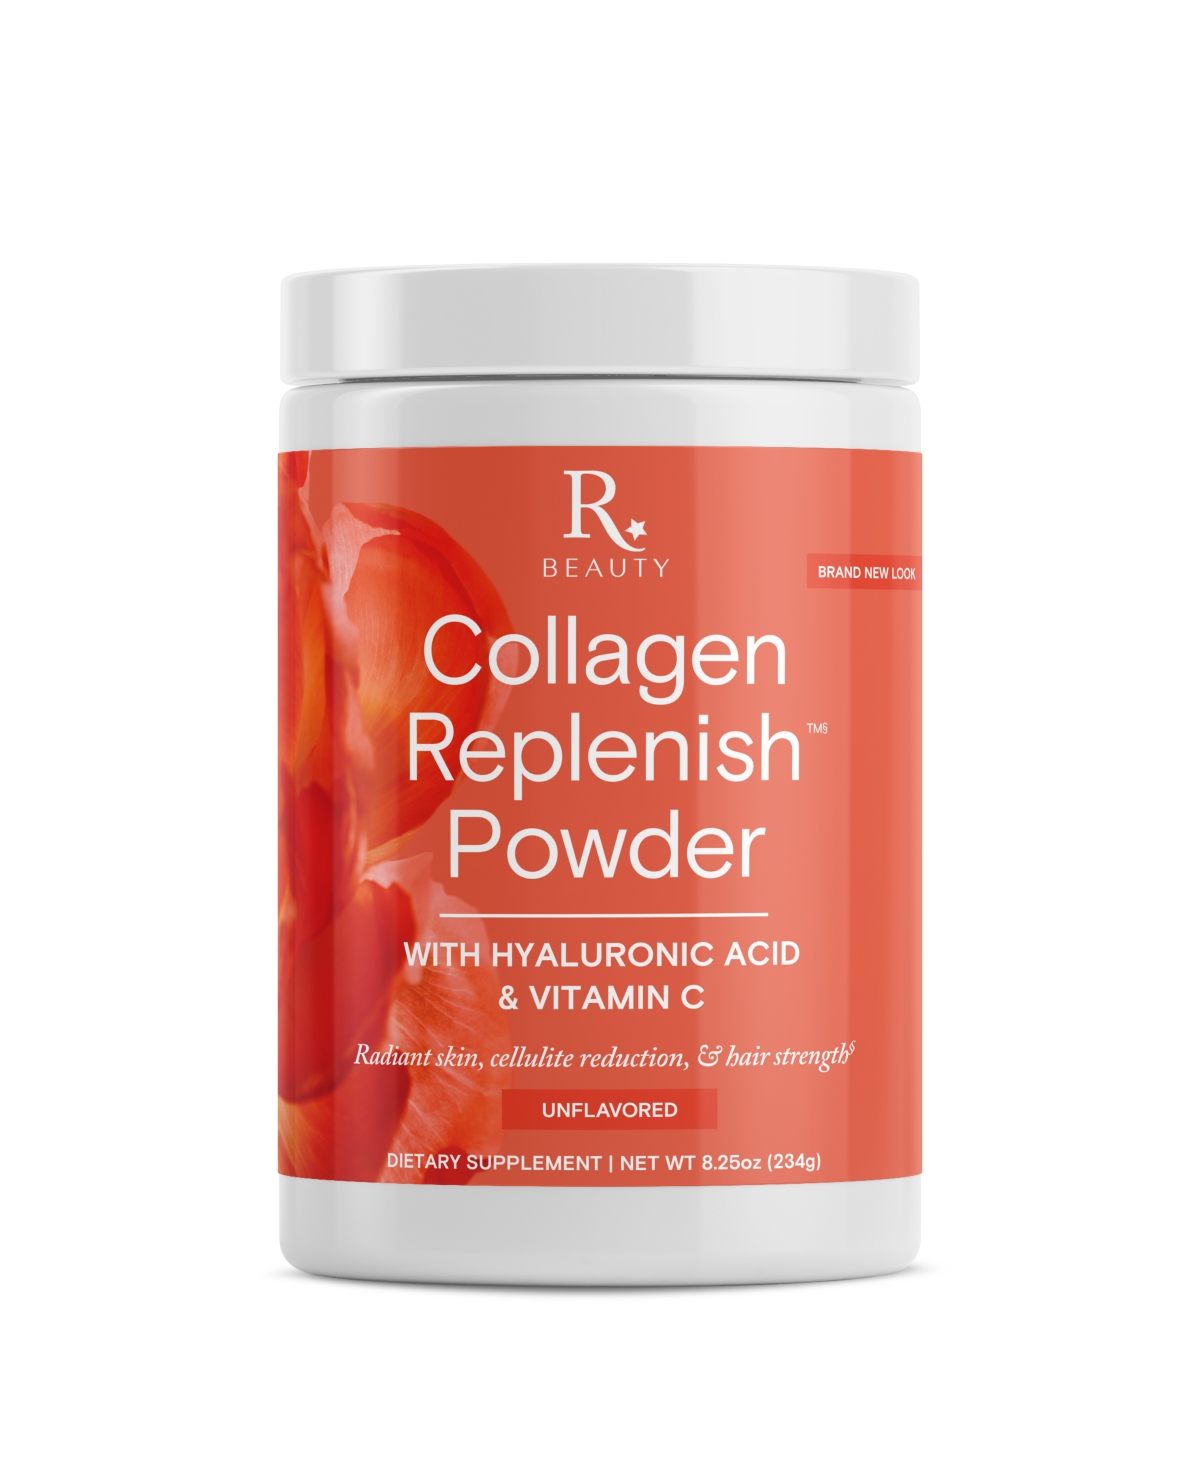 Beauty, Collagen Replenish Powder with Hyaluronic Acid & Vitamin C, for Radiant Skin, Cellulite Reduction & Hair Strength, 8.25 Oz, Unflavo